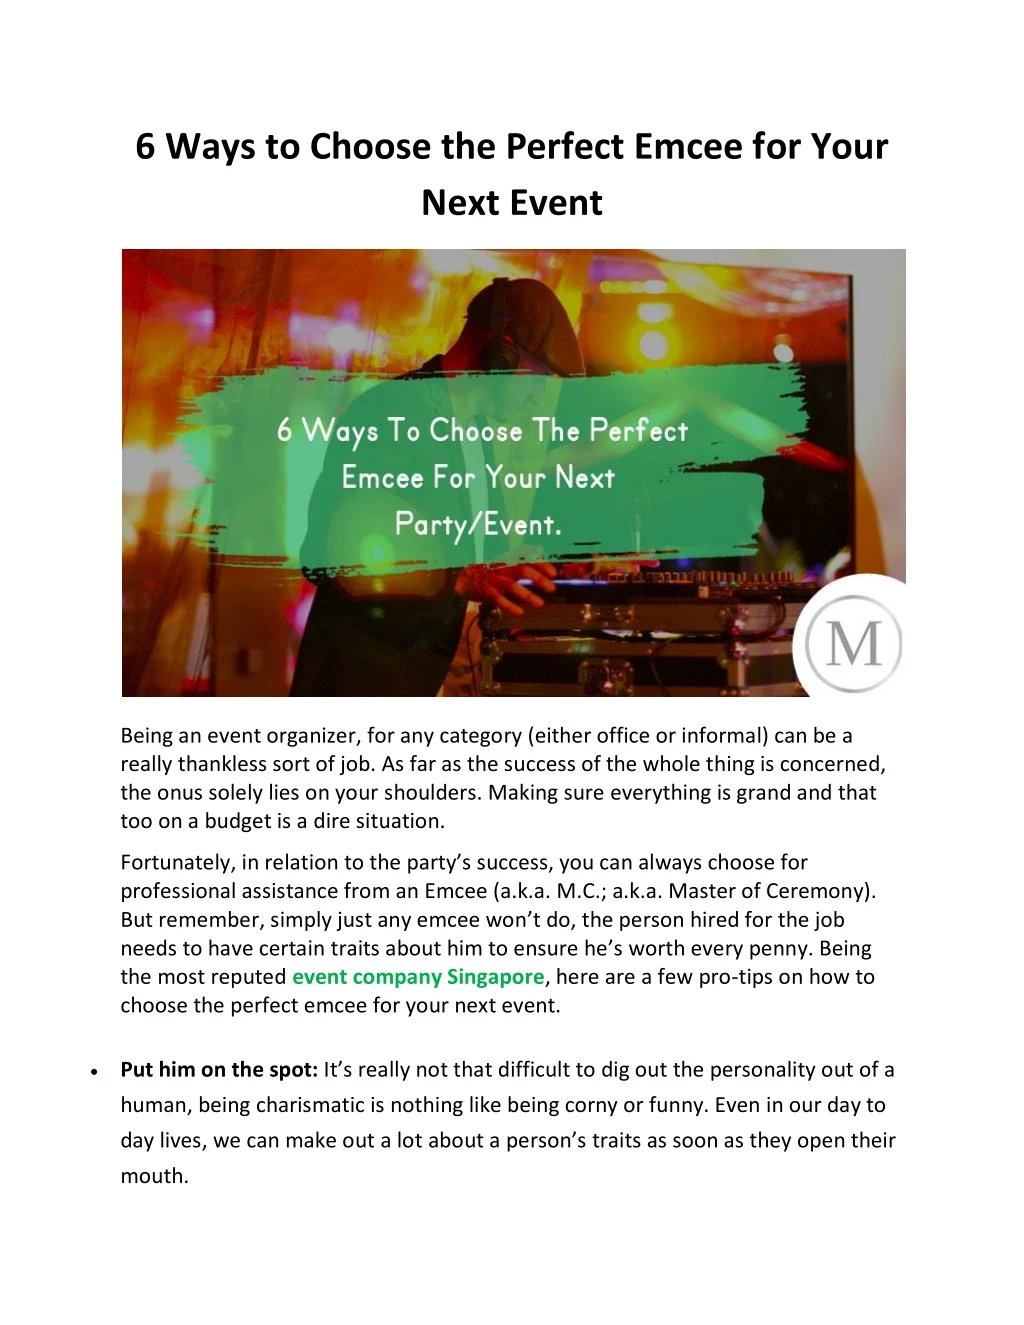 6 ways to choose the perfect emcee for your next